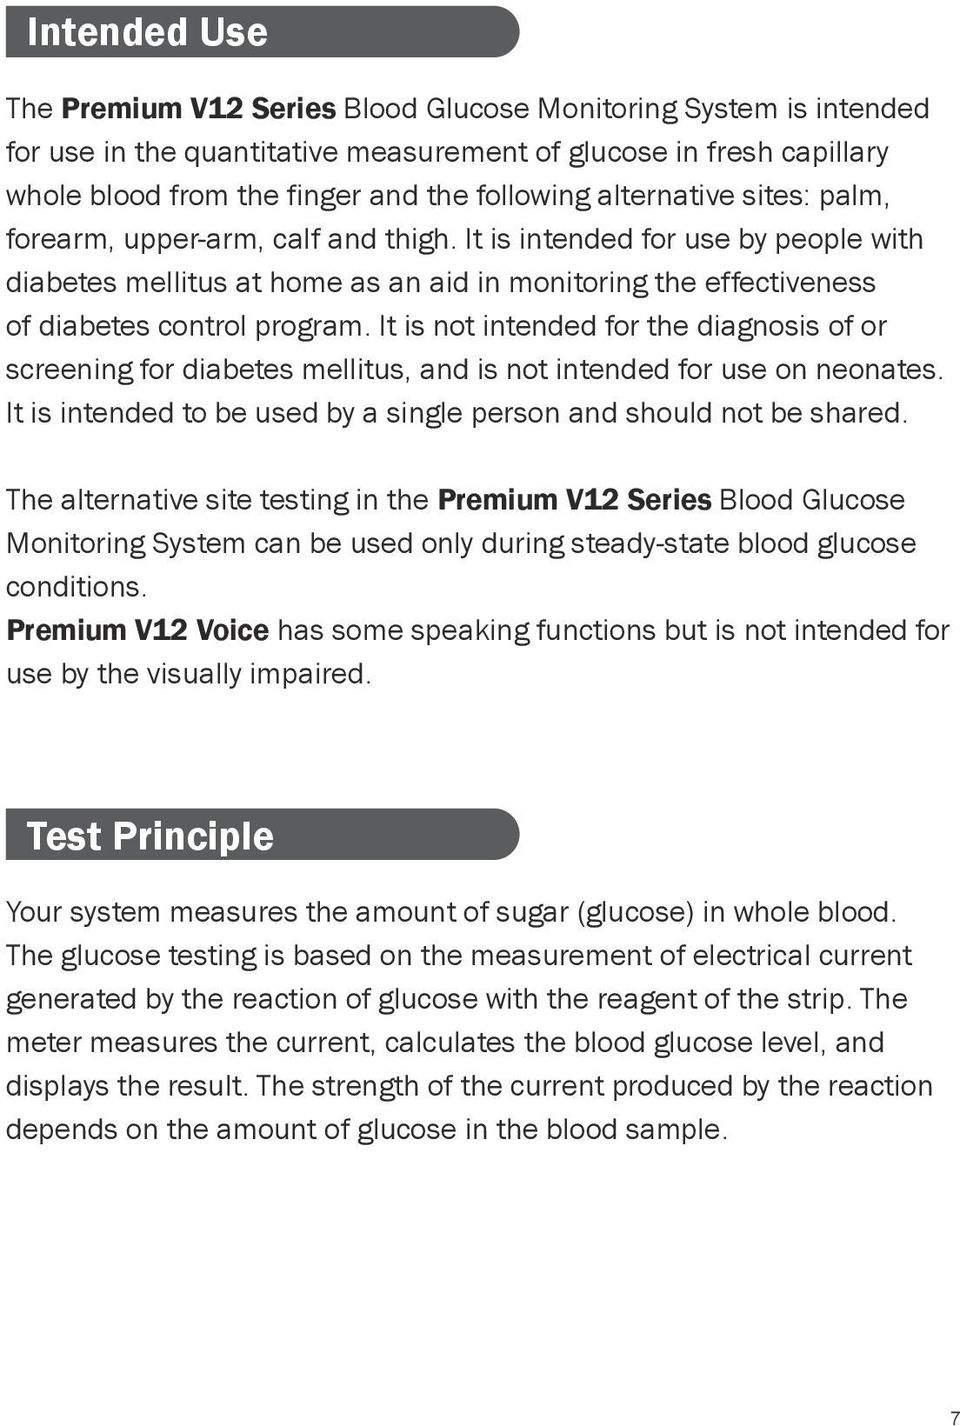 It is not intended for the diagnosis of or screening for diabetes mellitus, and is not intended for use on neonates. It is intended to be used by a single person and should not be shared.